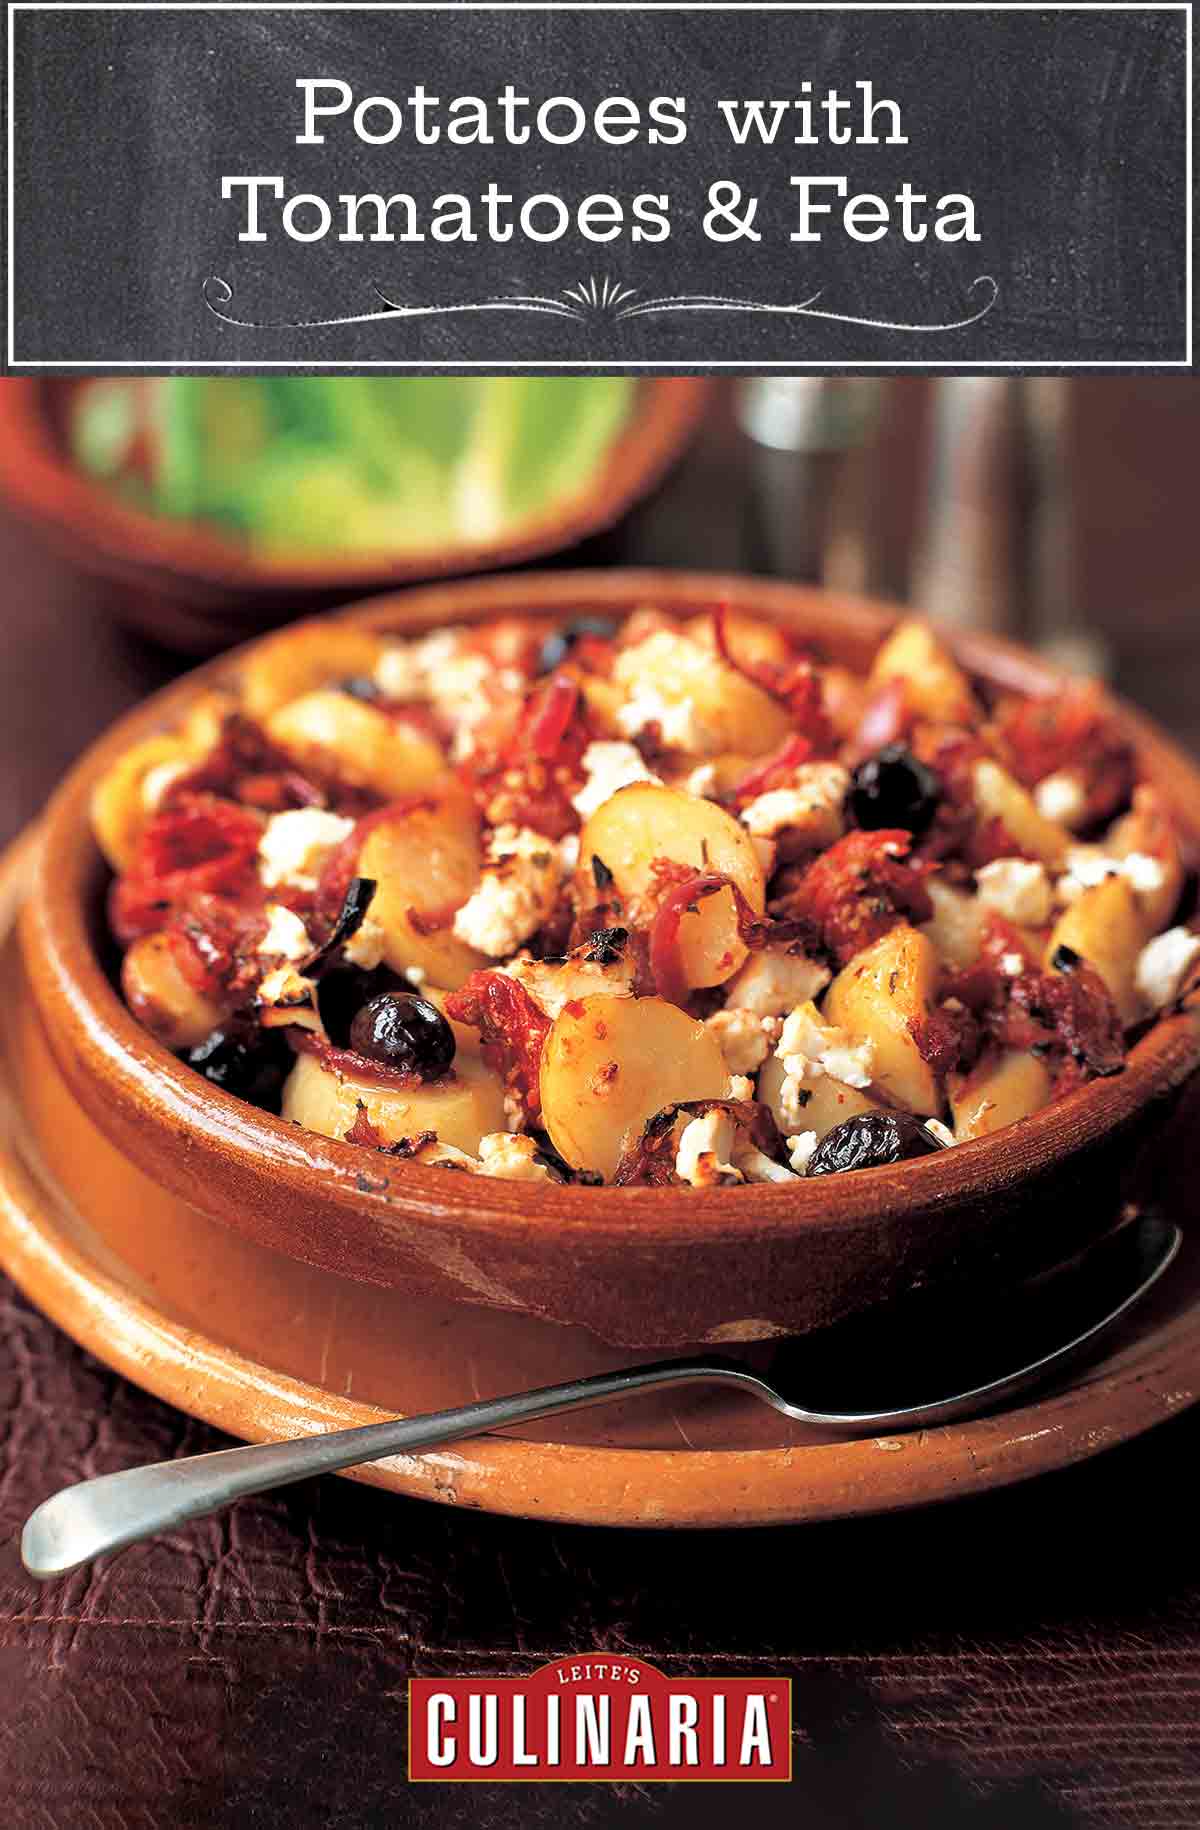 A terracotta dish filled with potatoes, feta, black olives, and tomatoes.